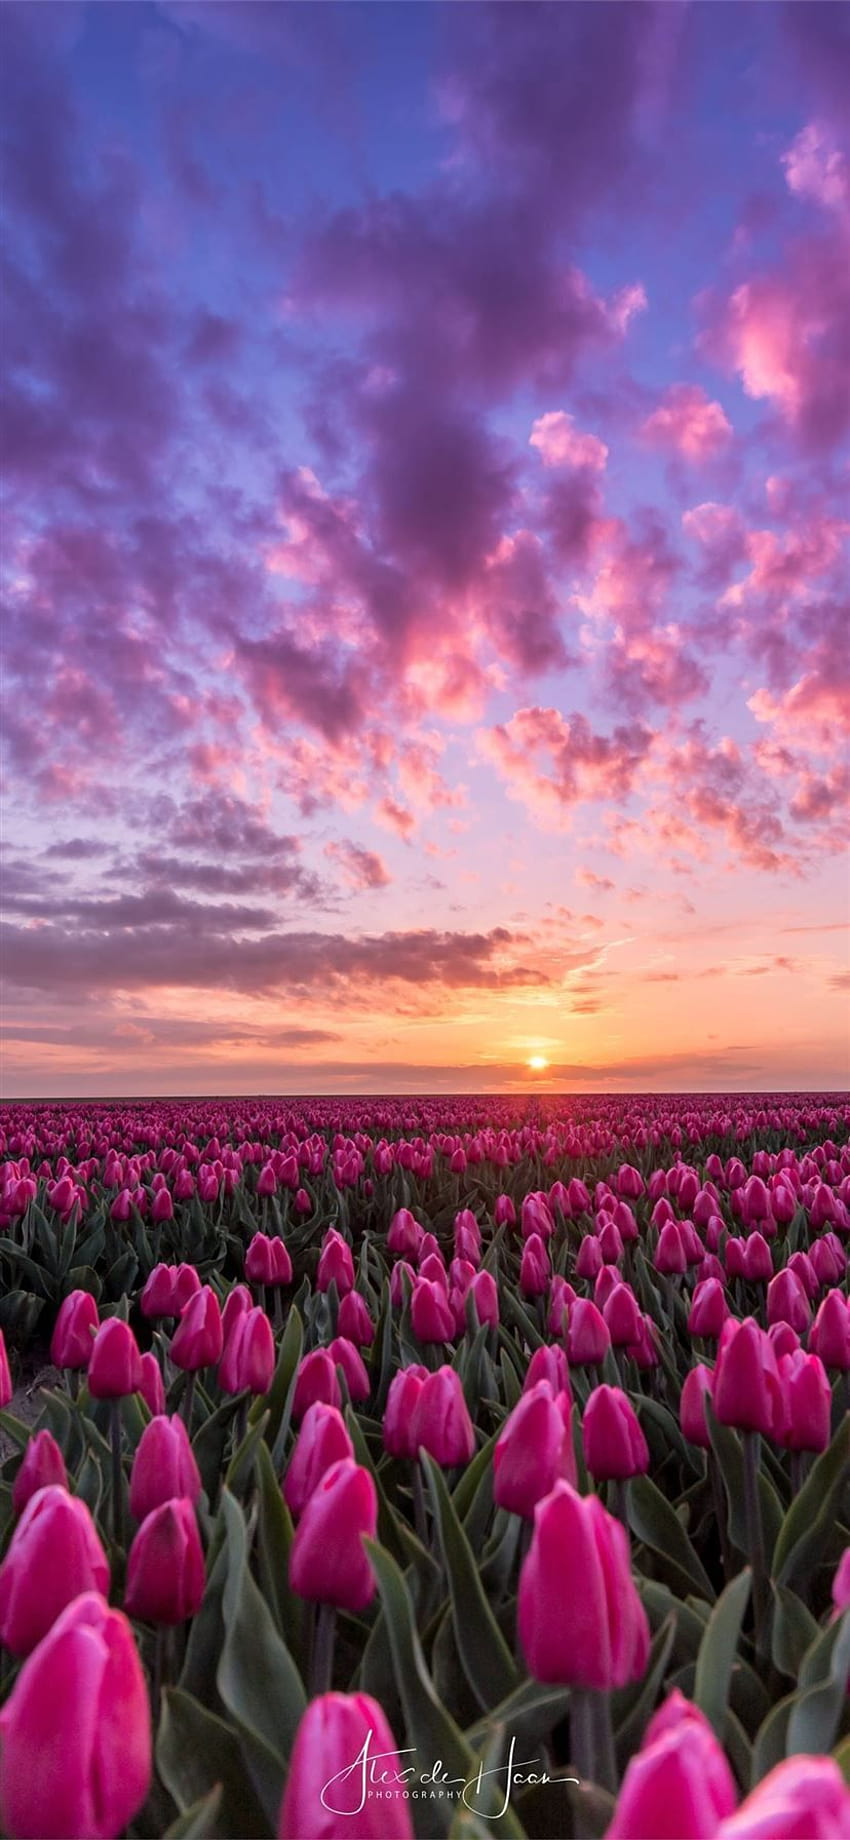 Tulip Fields of Netherlands iPhone 11, tulips field at sunset HD phone wallpaper